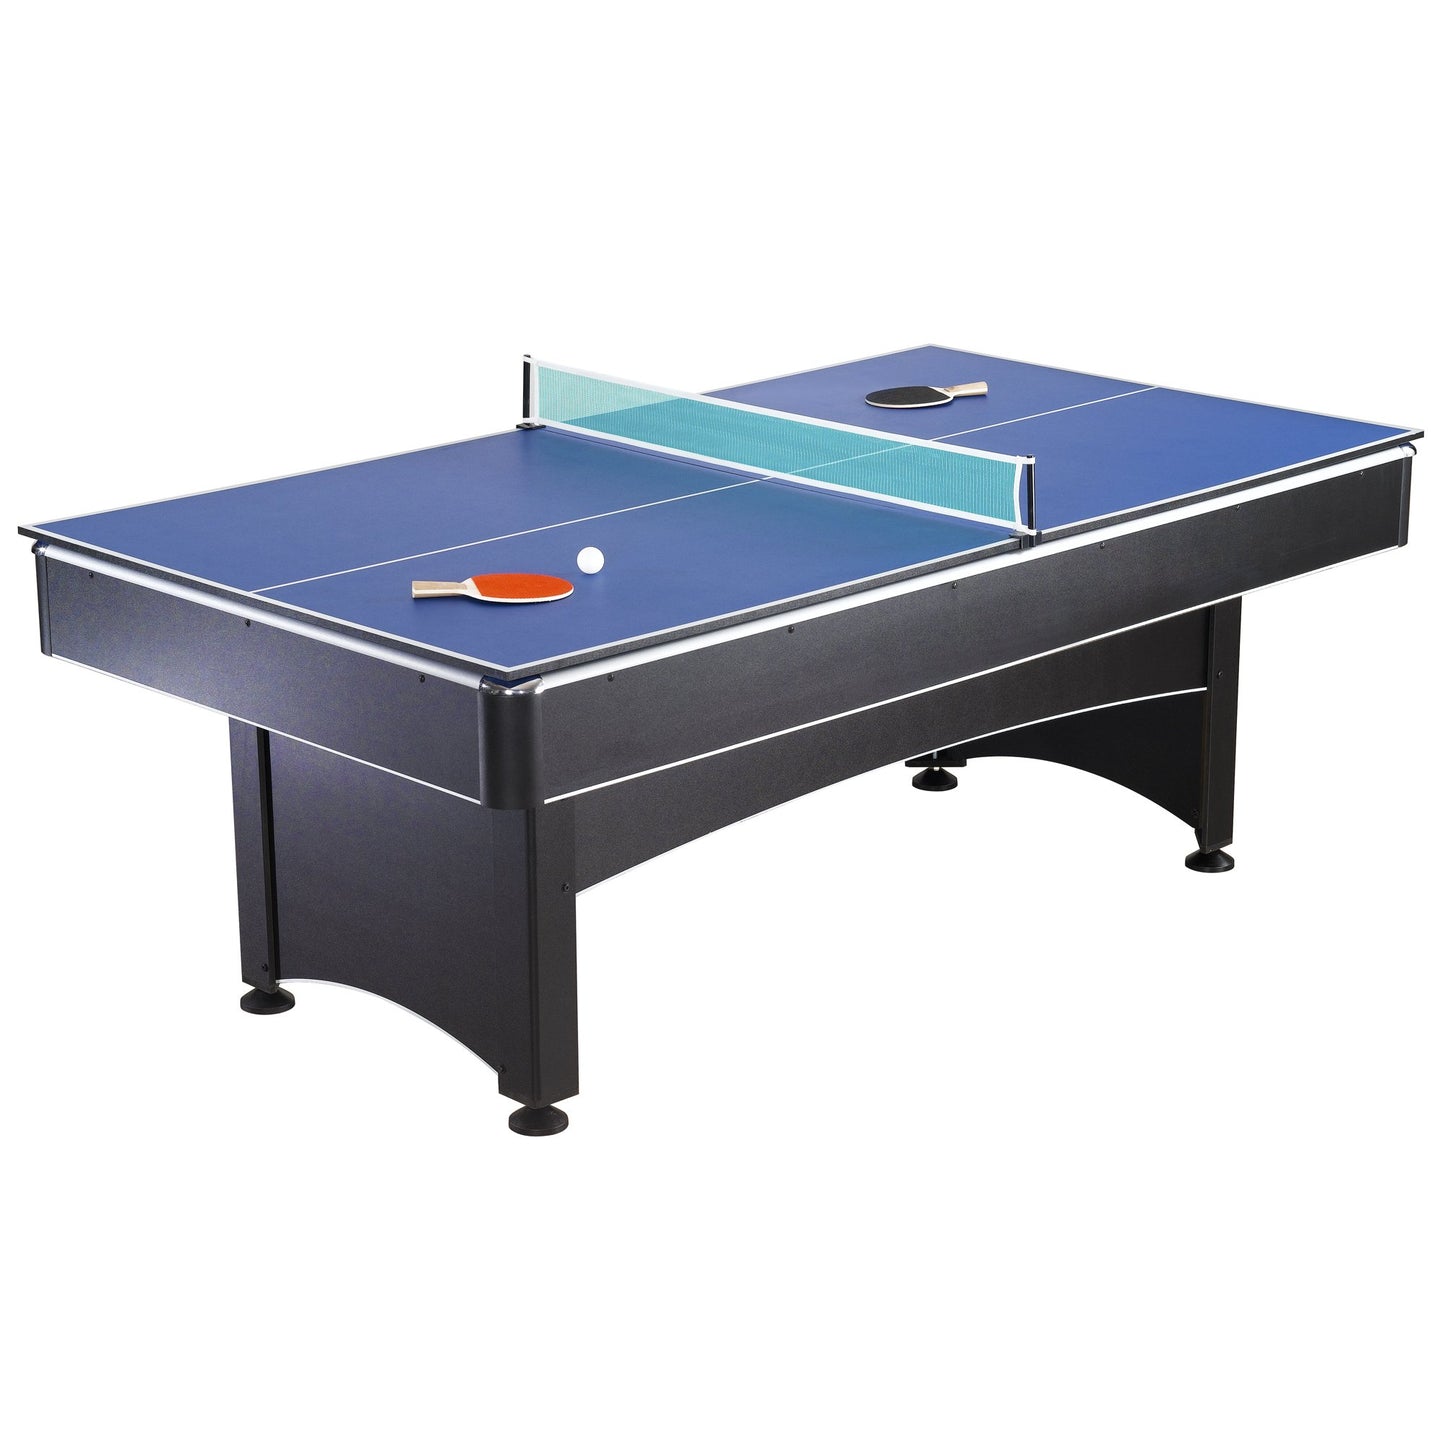 Hathaway Maverick 7ft Multi Game Table 2 in 1 - Gaming Blaze